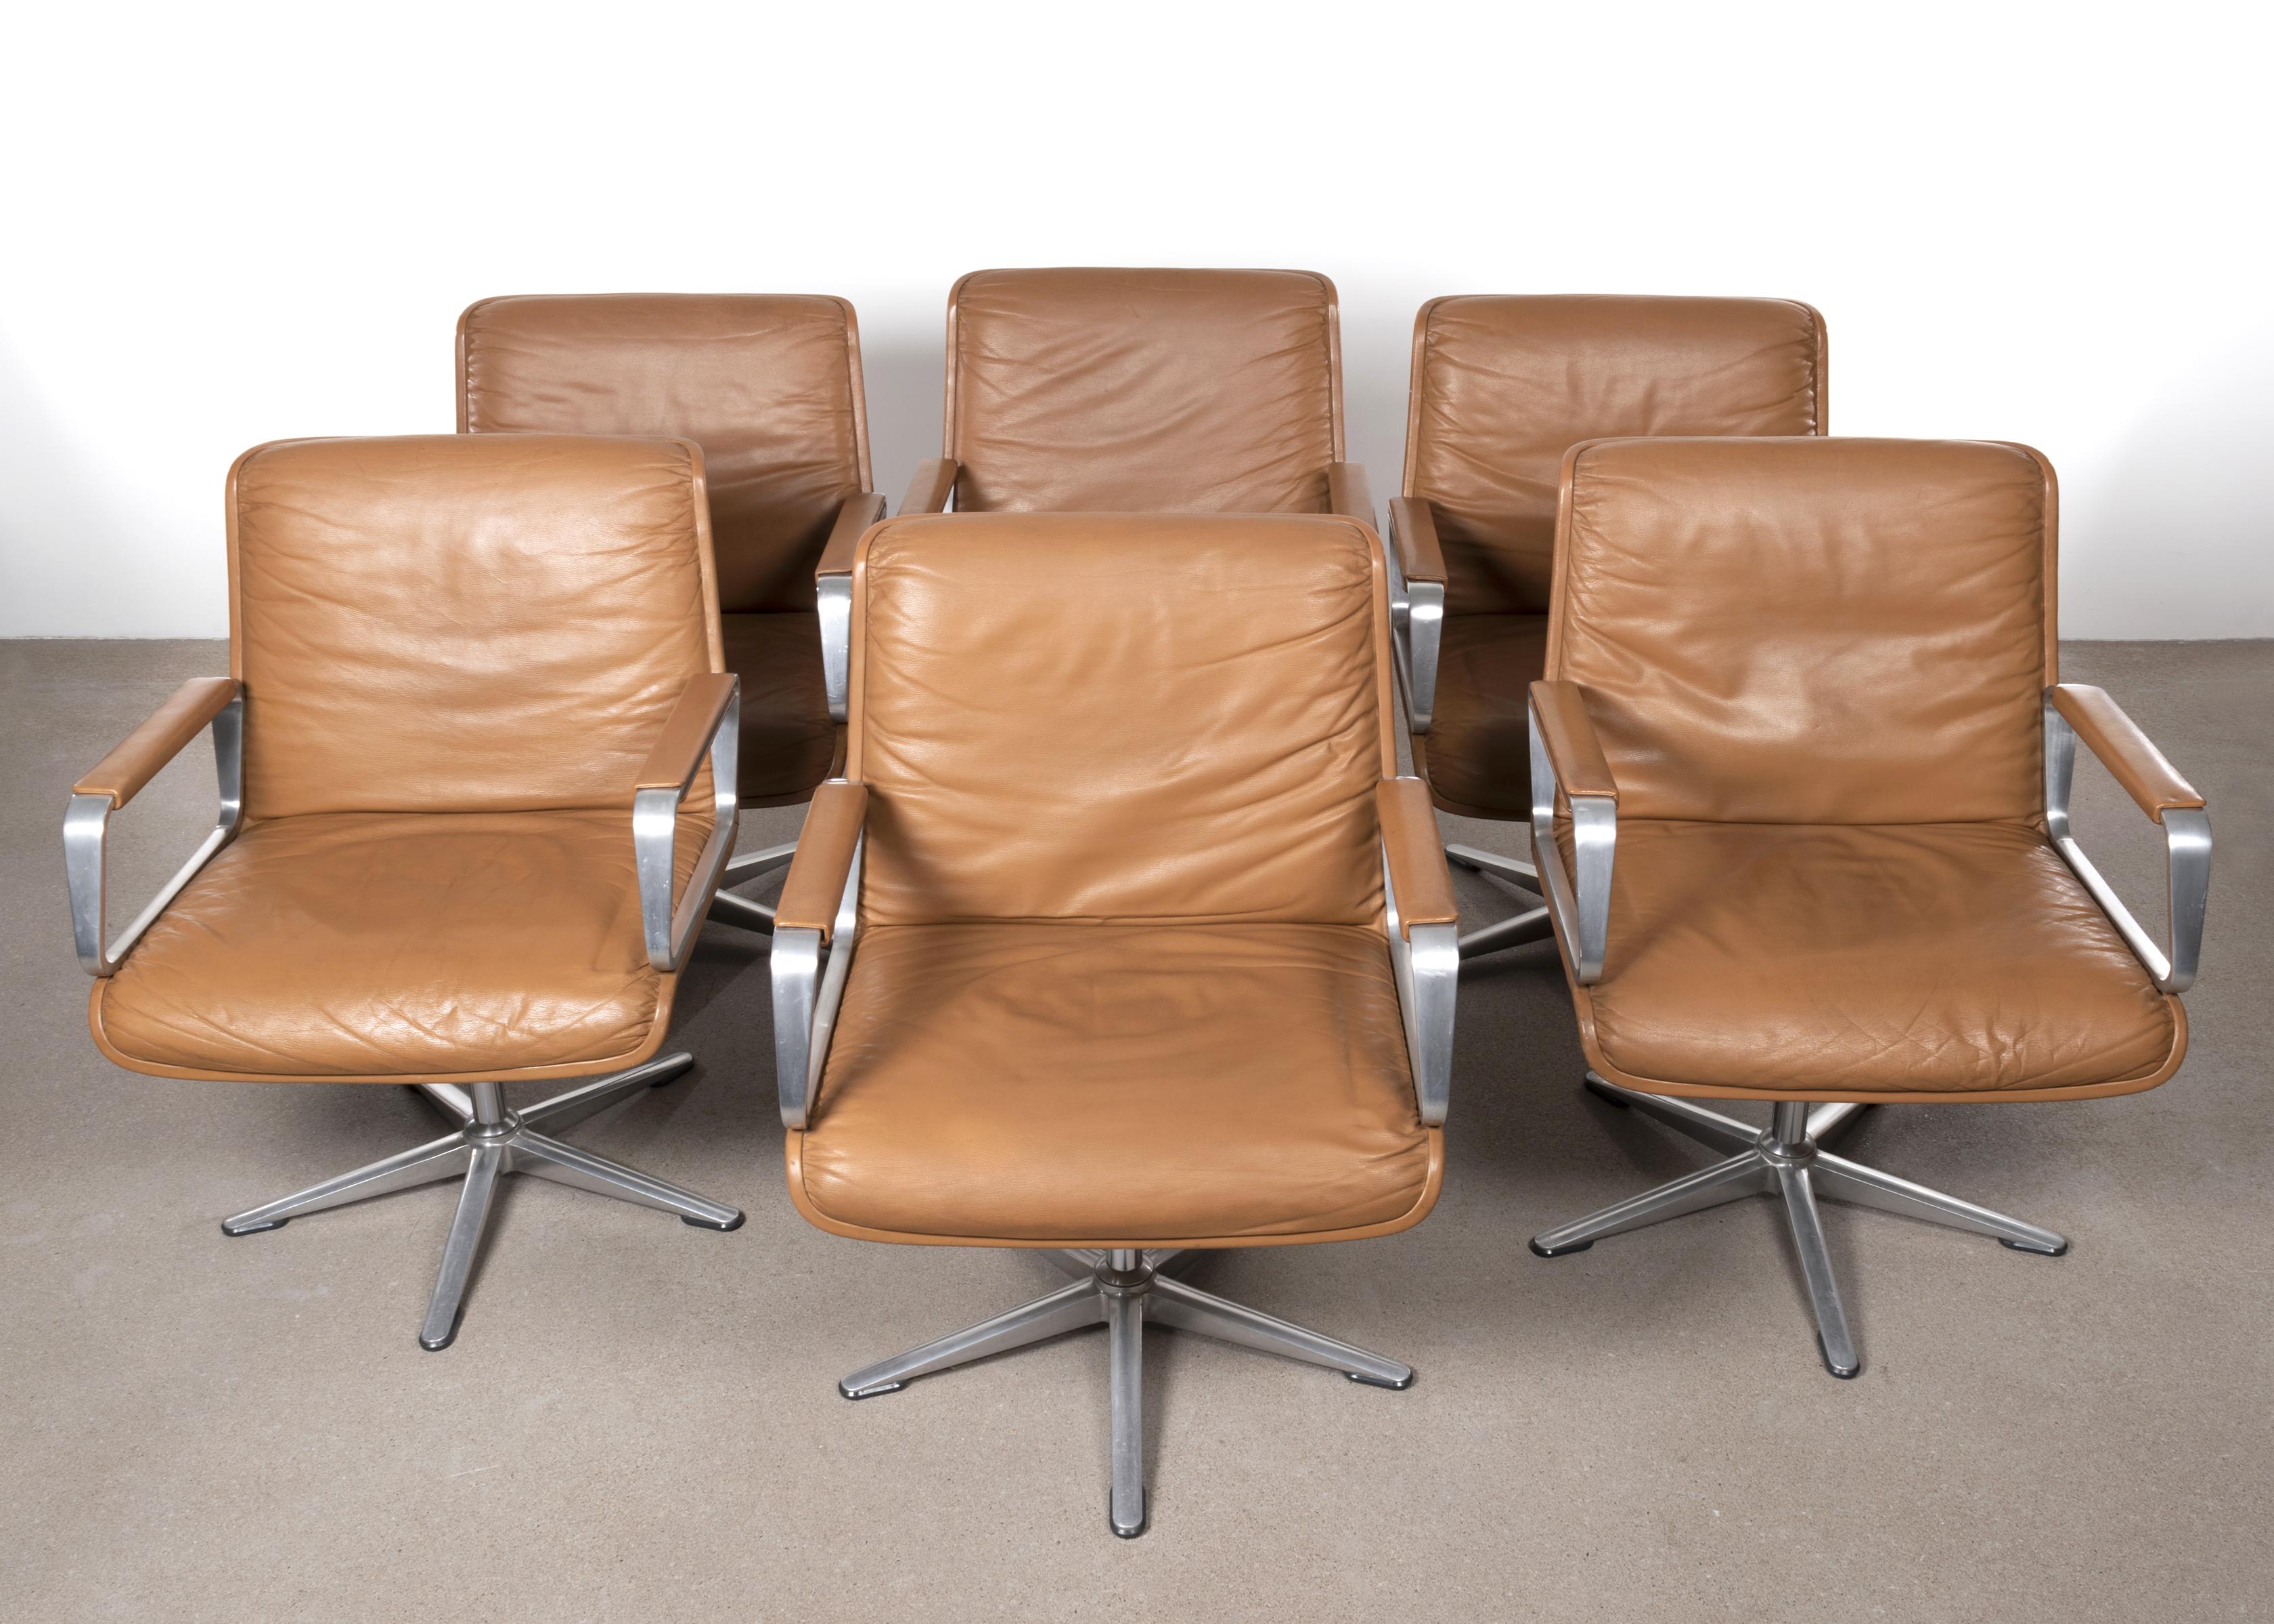 Delta Design Program 2000 Soft Pad Chairs in Cognac Leather for Wilkhahn, 1968 1